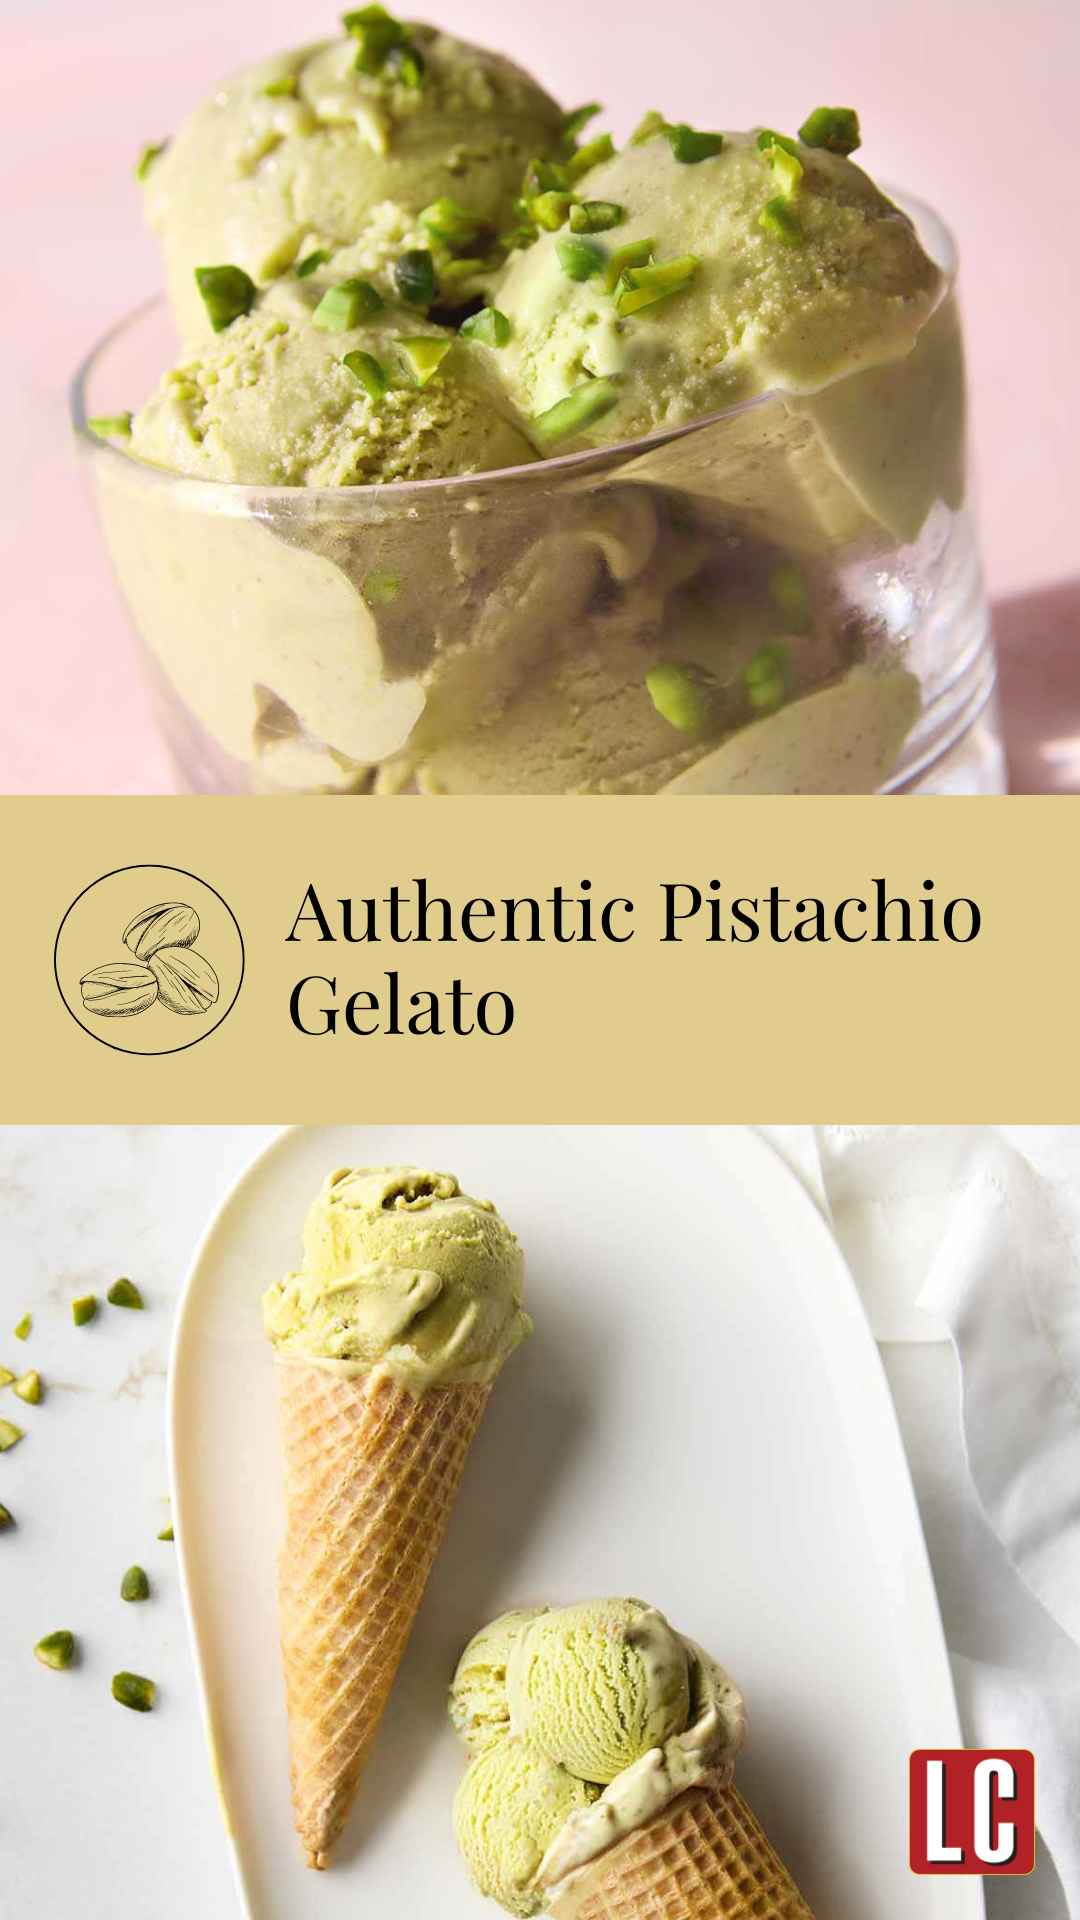 A bowl containing four scoops of pistachio gelato with chopped pistachios on top and a platter with two ice cream cones filled with pistachio gelato.